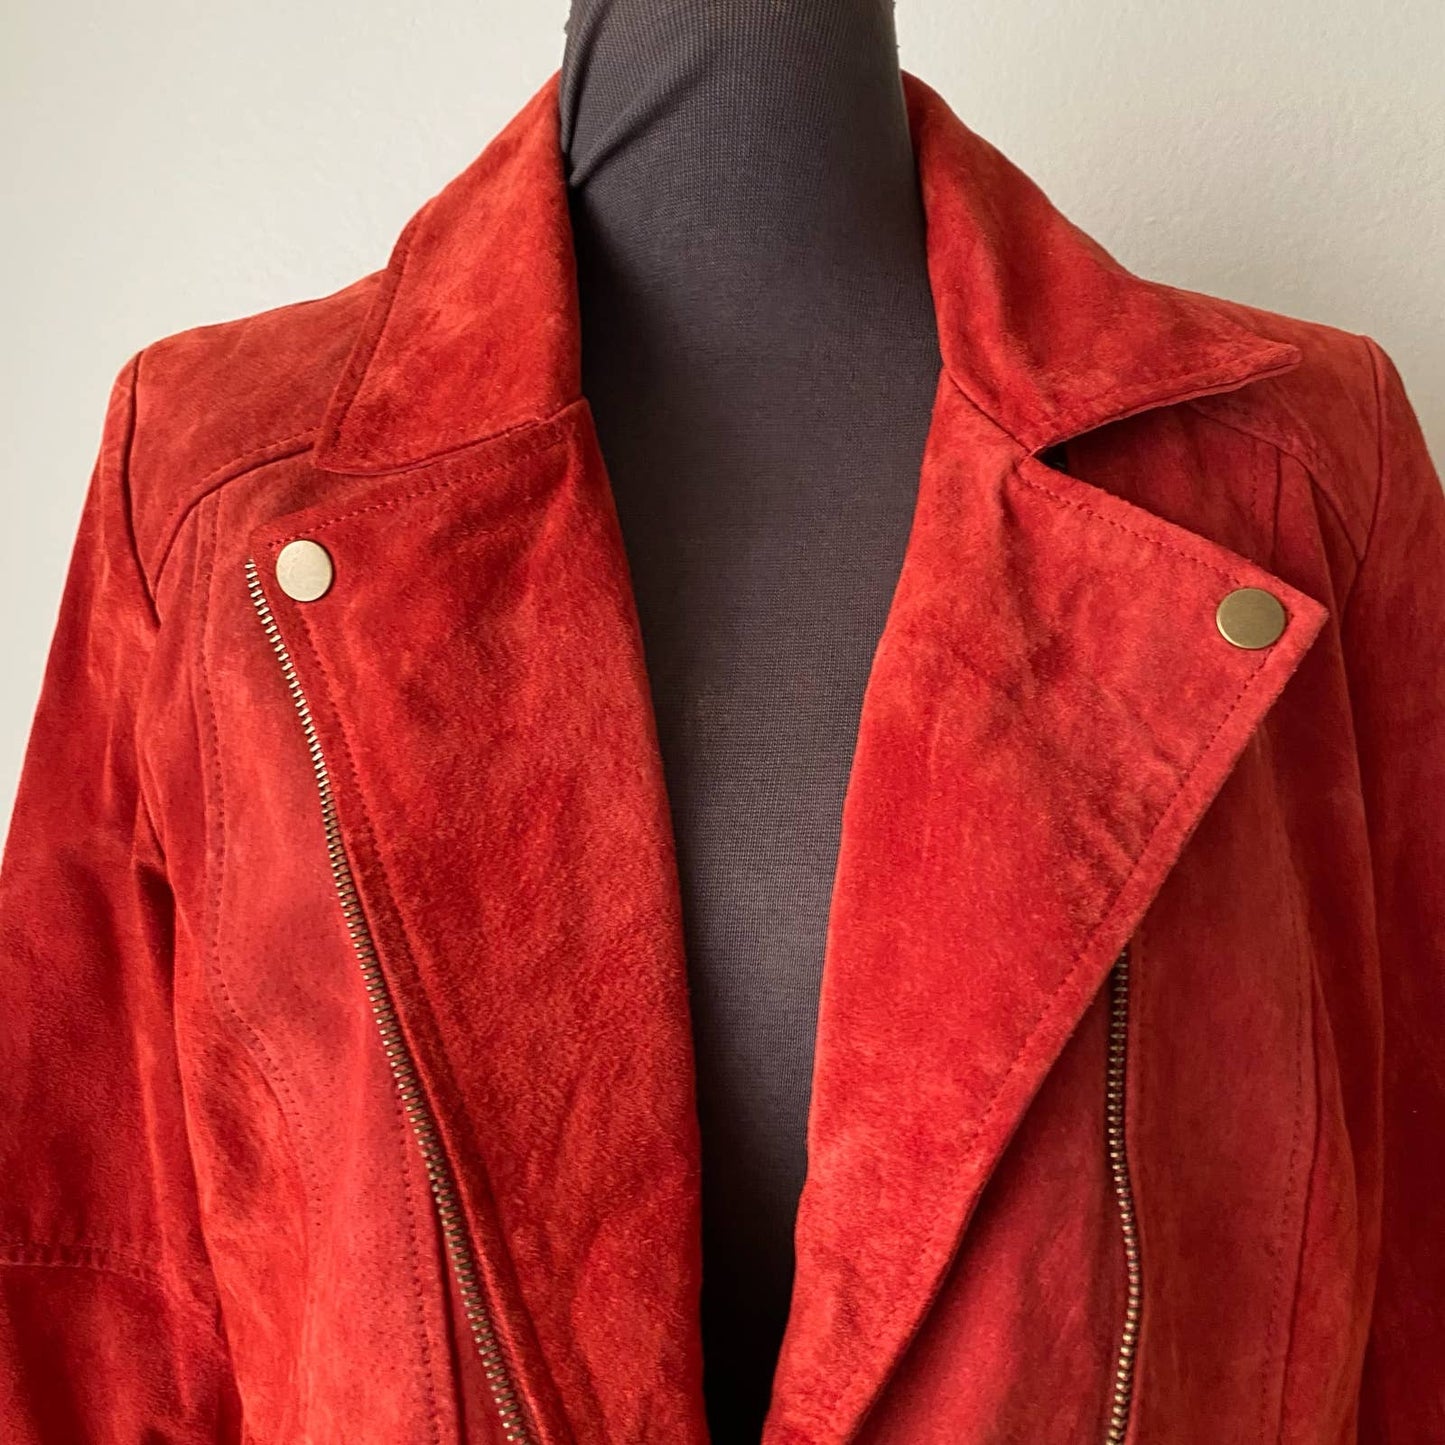 Urban Outfitter sz 6 Moto zip suede leather jacket